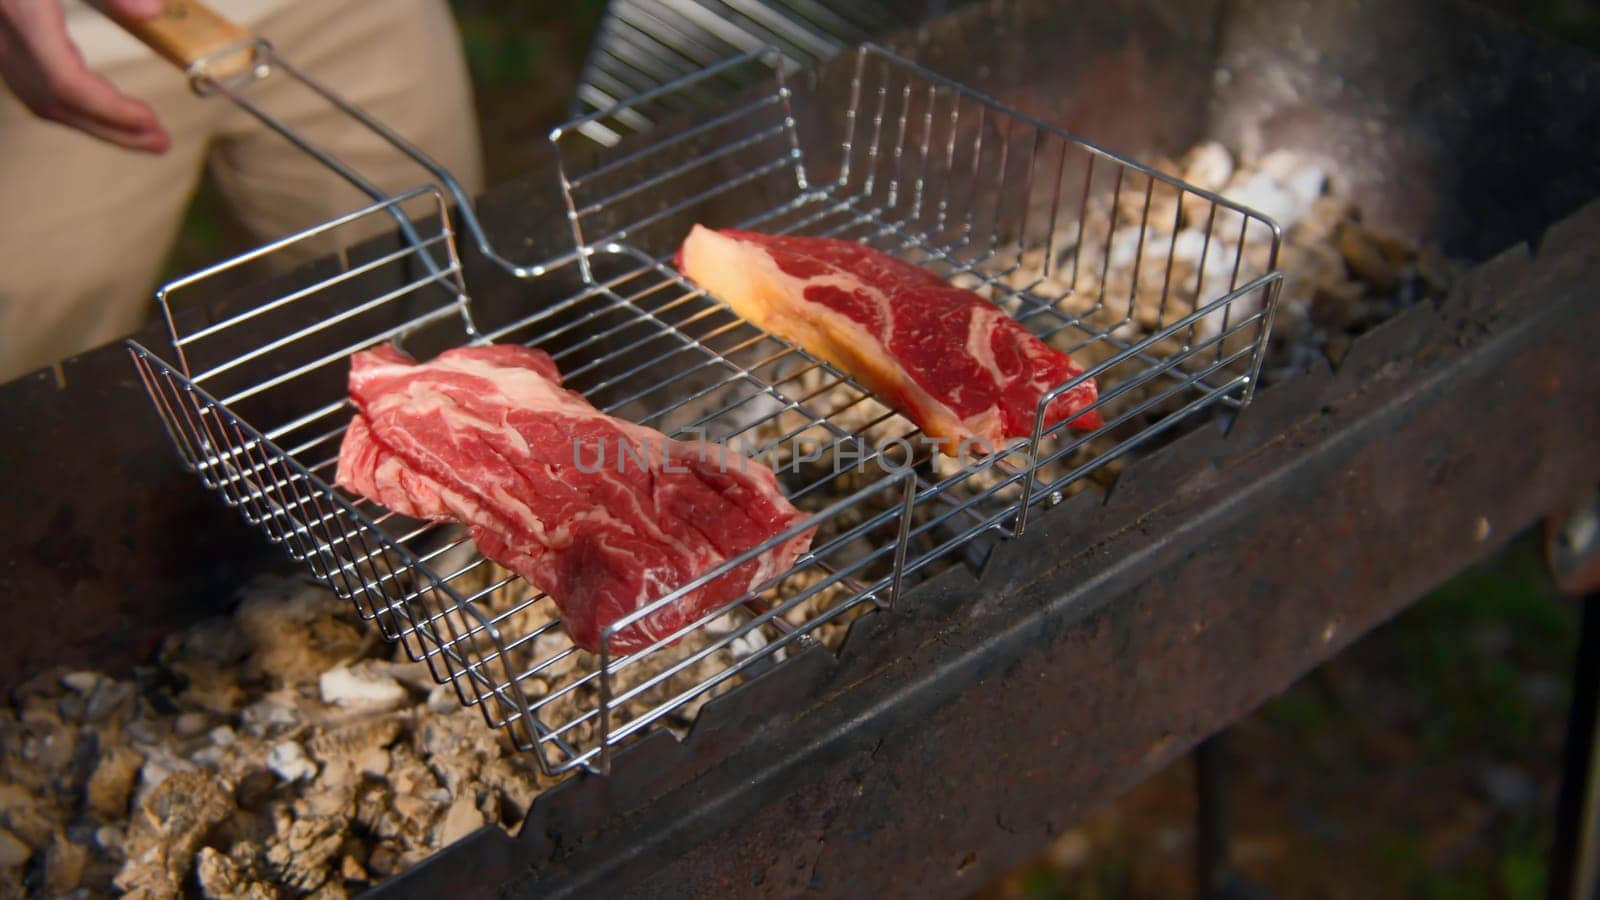 Close-up of man grilling pieces of red meat. Stock footage. Man cooks two pieces of beef or pork on grill. Man cooks meat on grill in nature in summer.